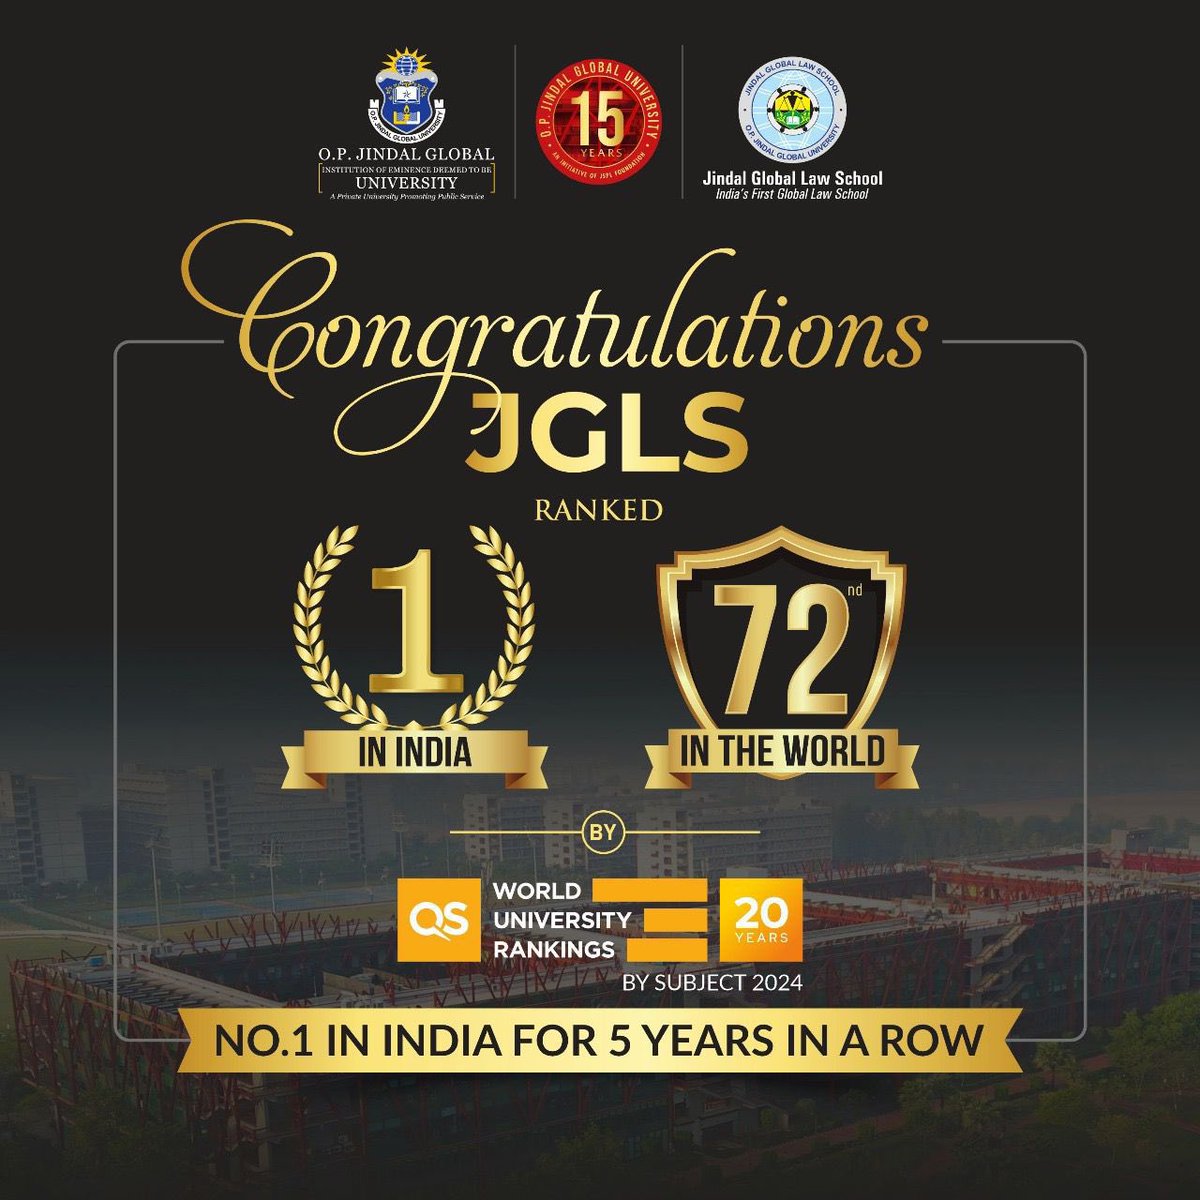 you all must appriciate this it's amazing

#JindalGlobalLawSchoolNo1